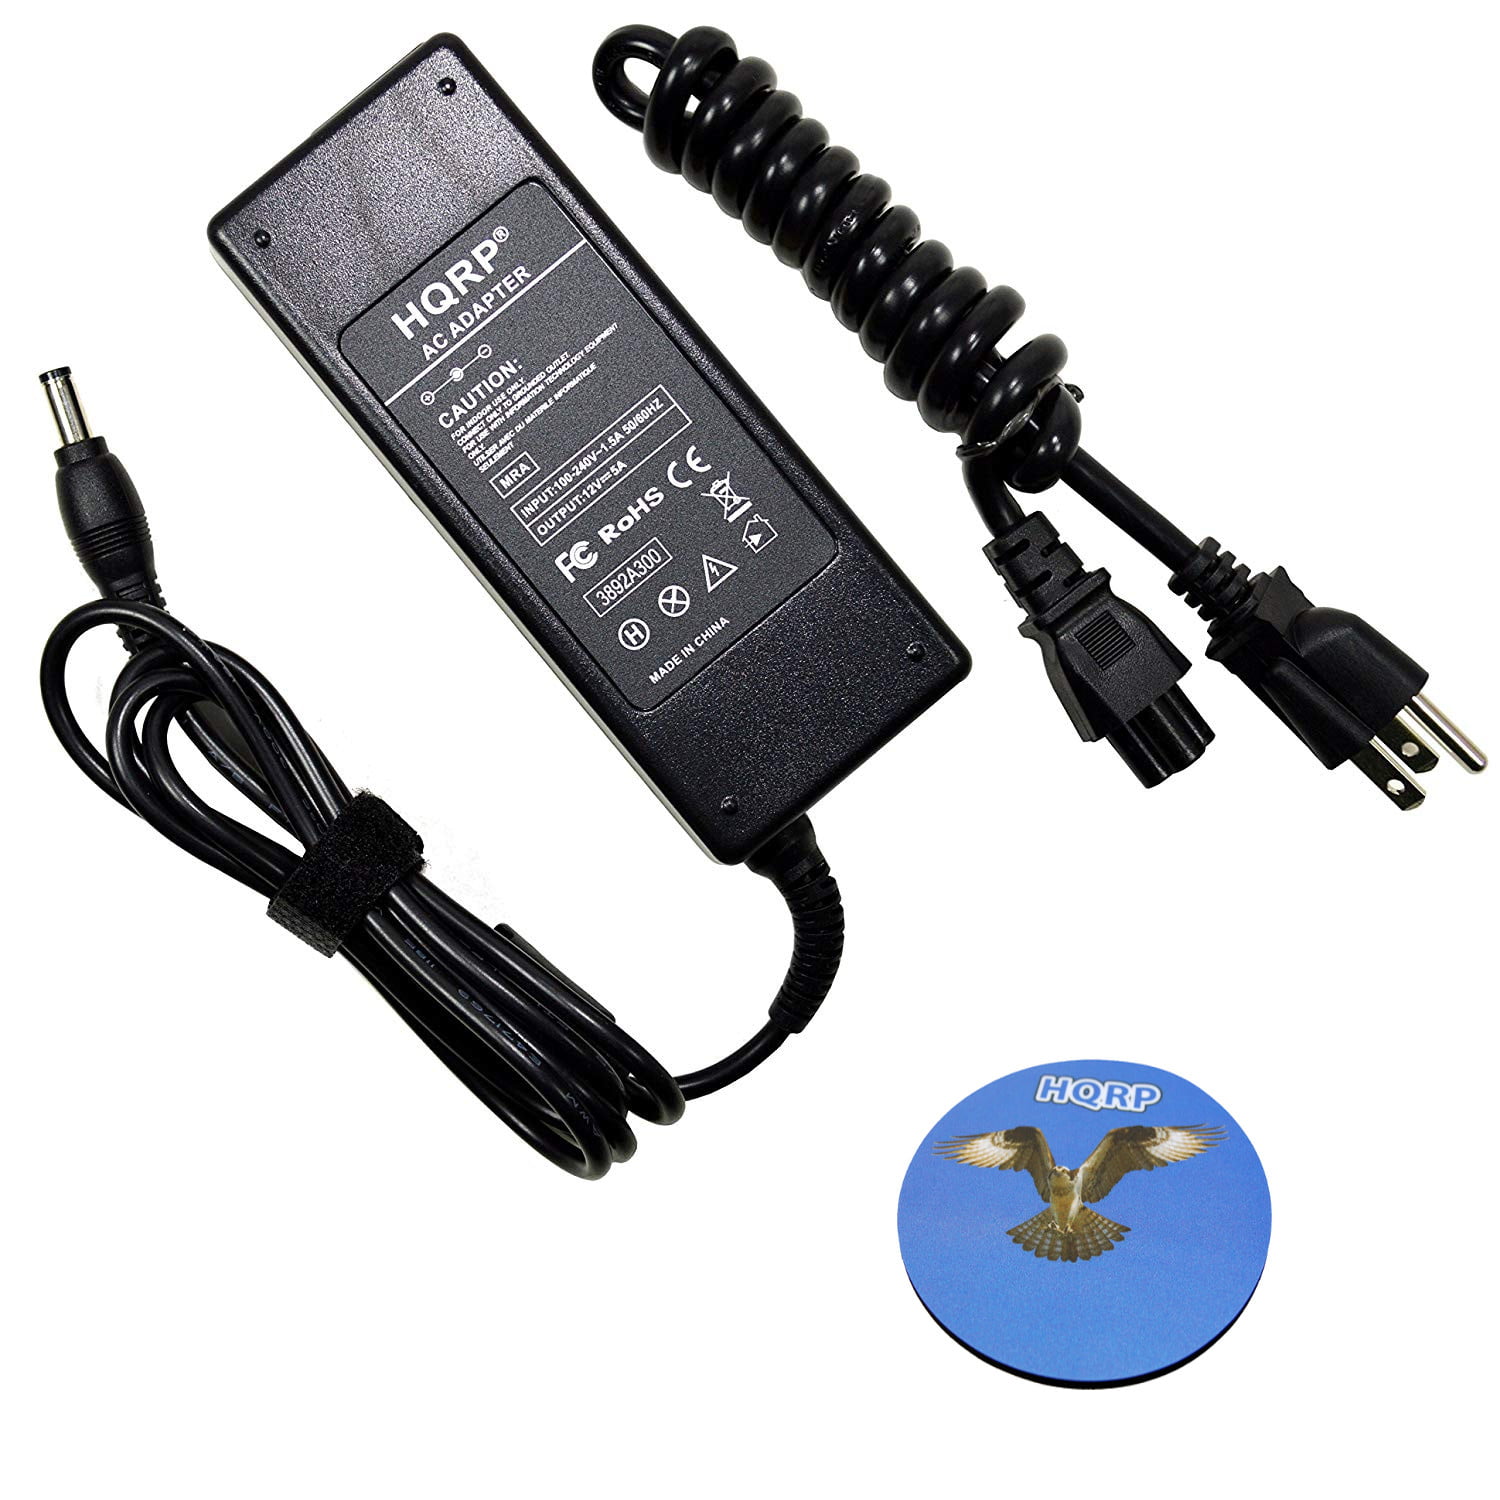 12V 4A AC Adapter Charger For TASCAM DP-01FX/CD Porta studio Power Supply 